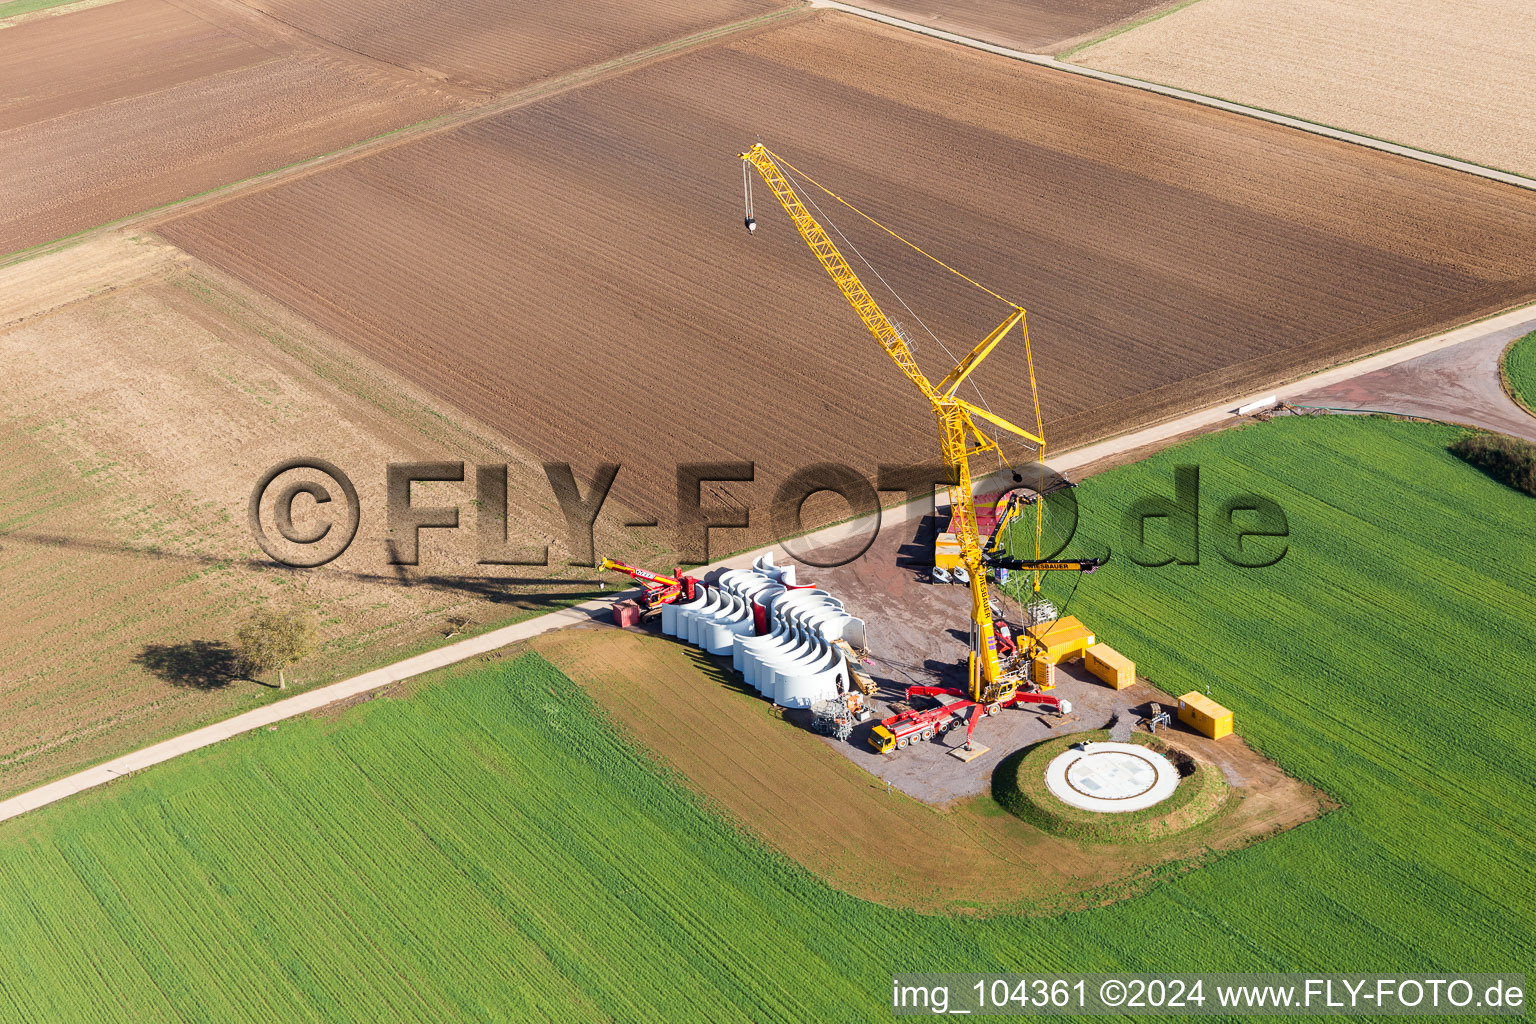 Construction site of the EnBW wind farm Freckenfeld - for a wind turbine with 6 wind turbines in Freckenfeld in the state Rhineland-Palatinate, Germany from the plane